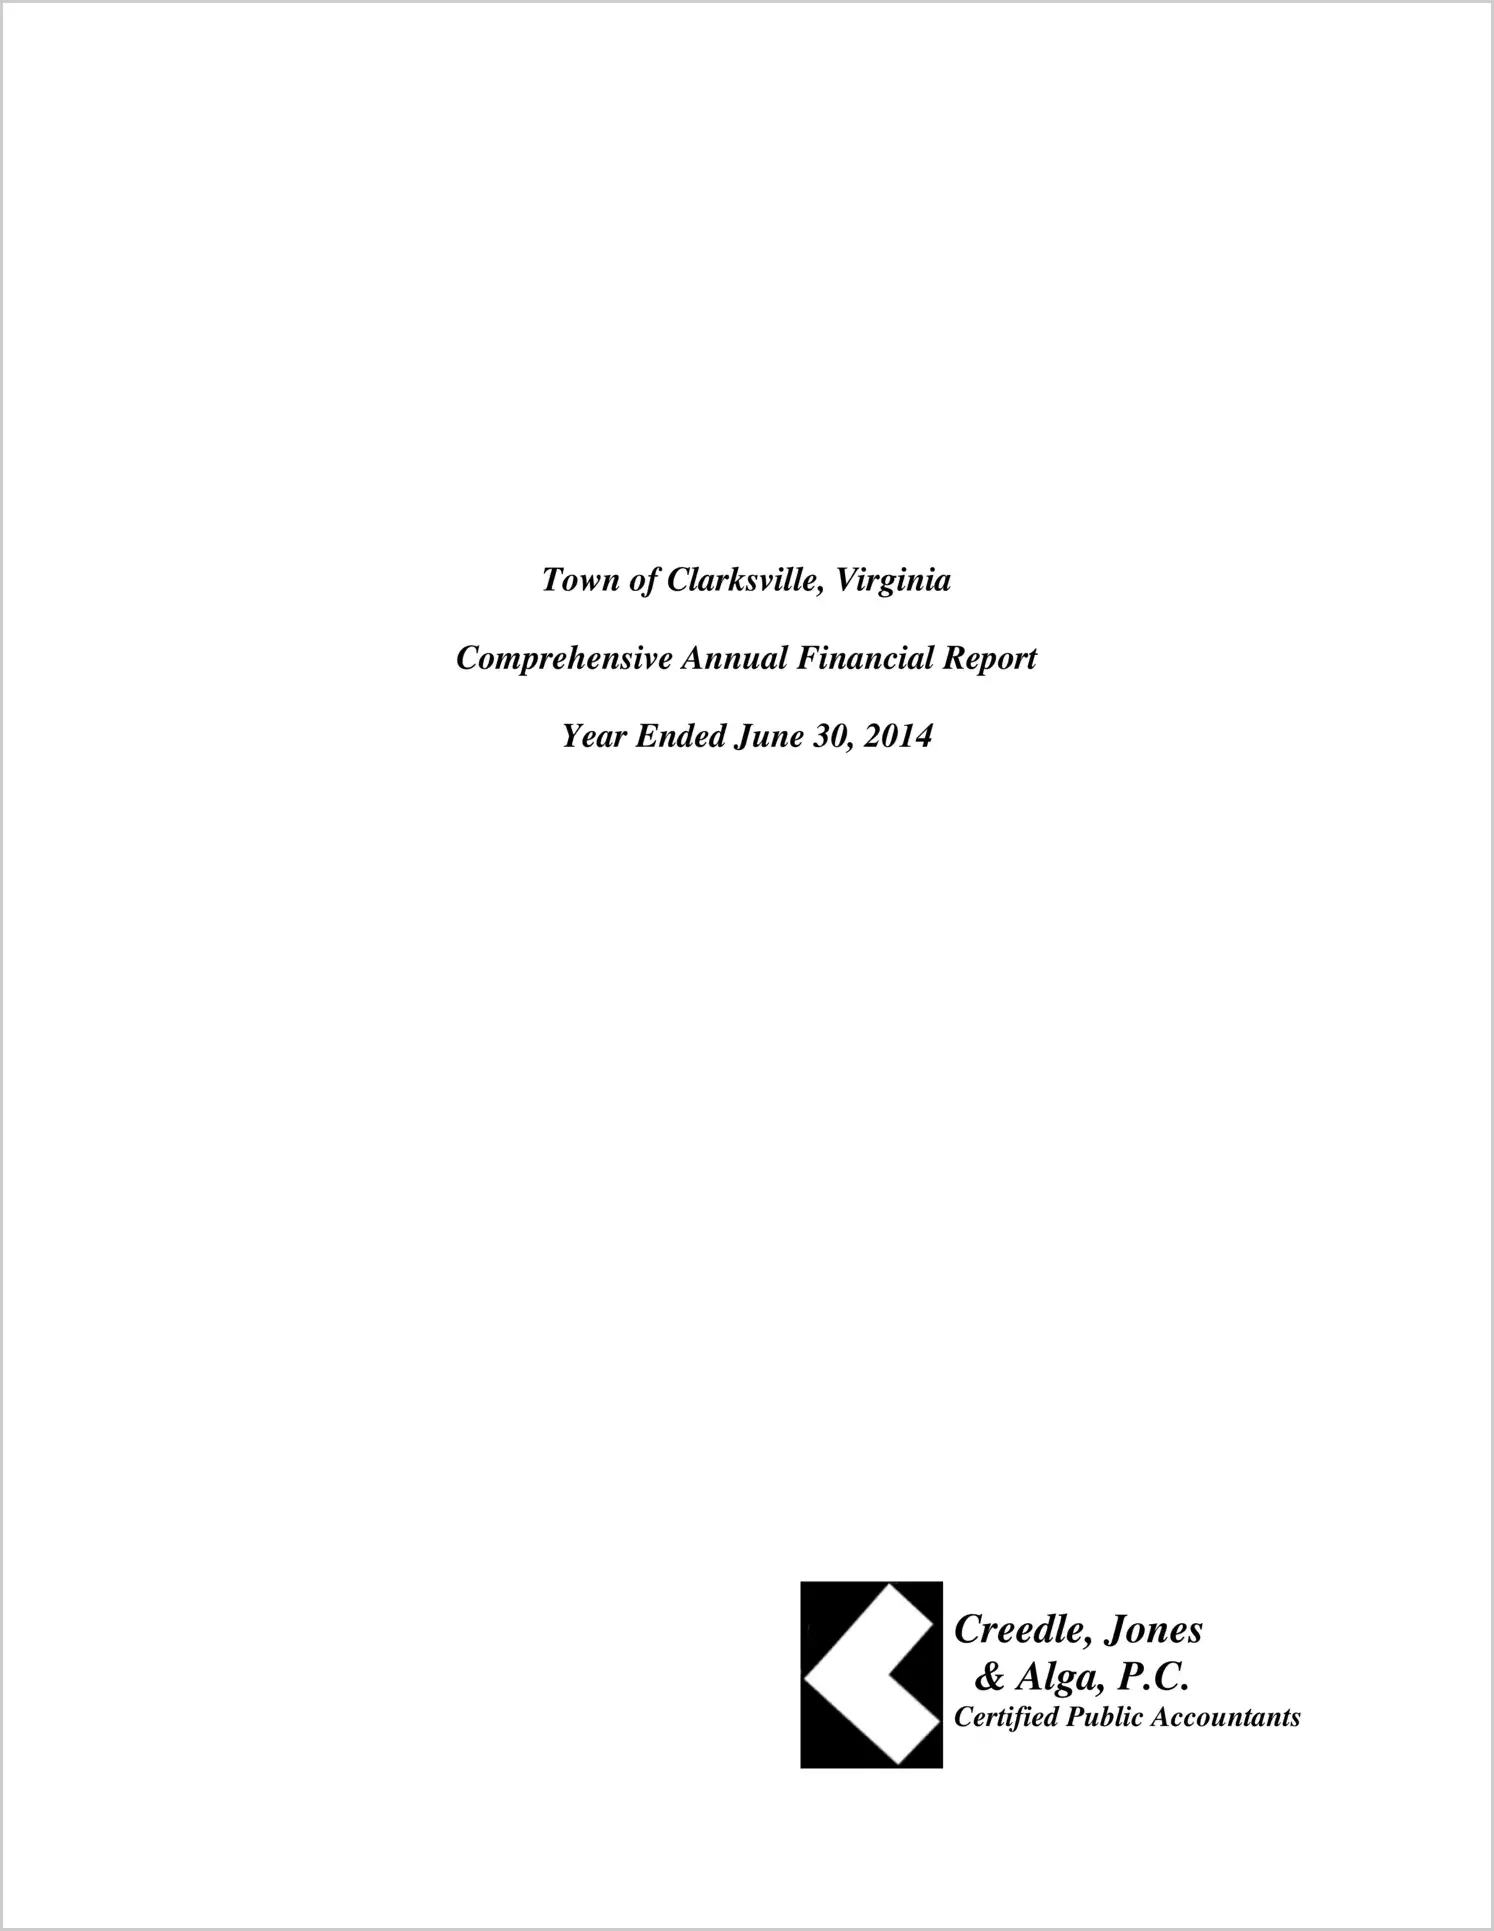 2014 Annual Financial Report for Town of Clarksville